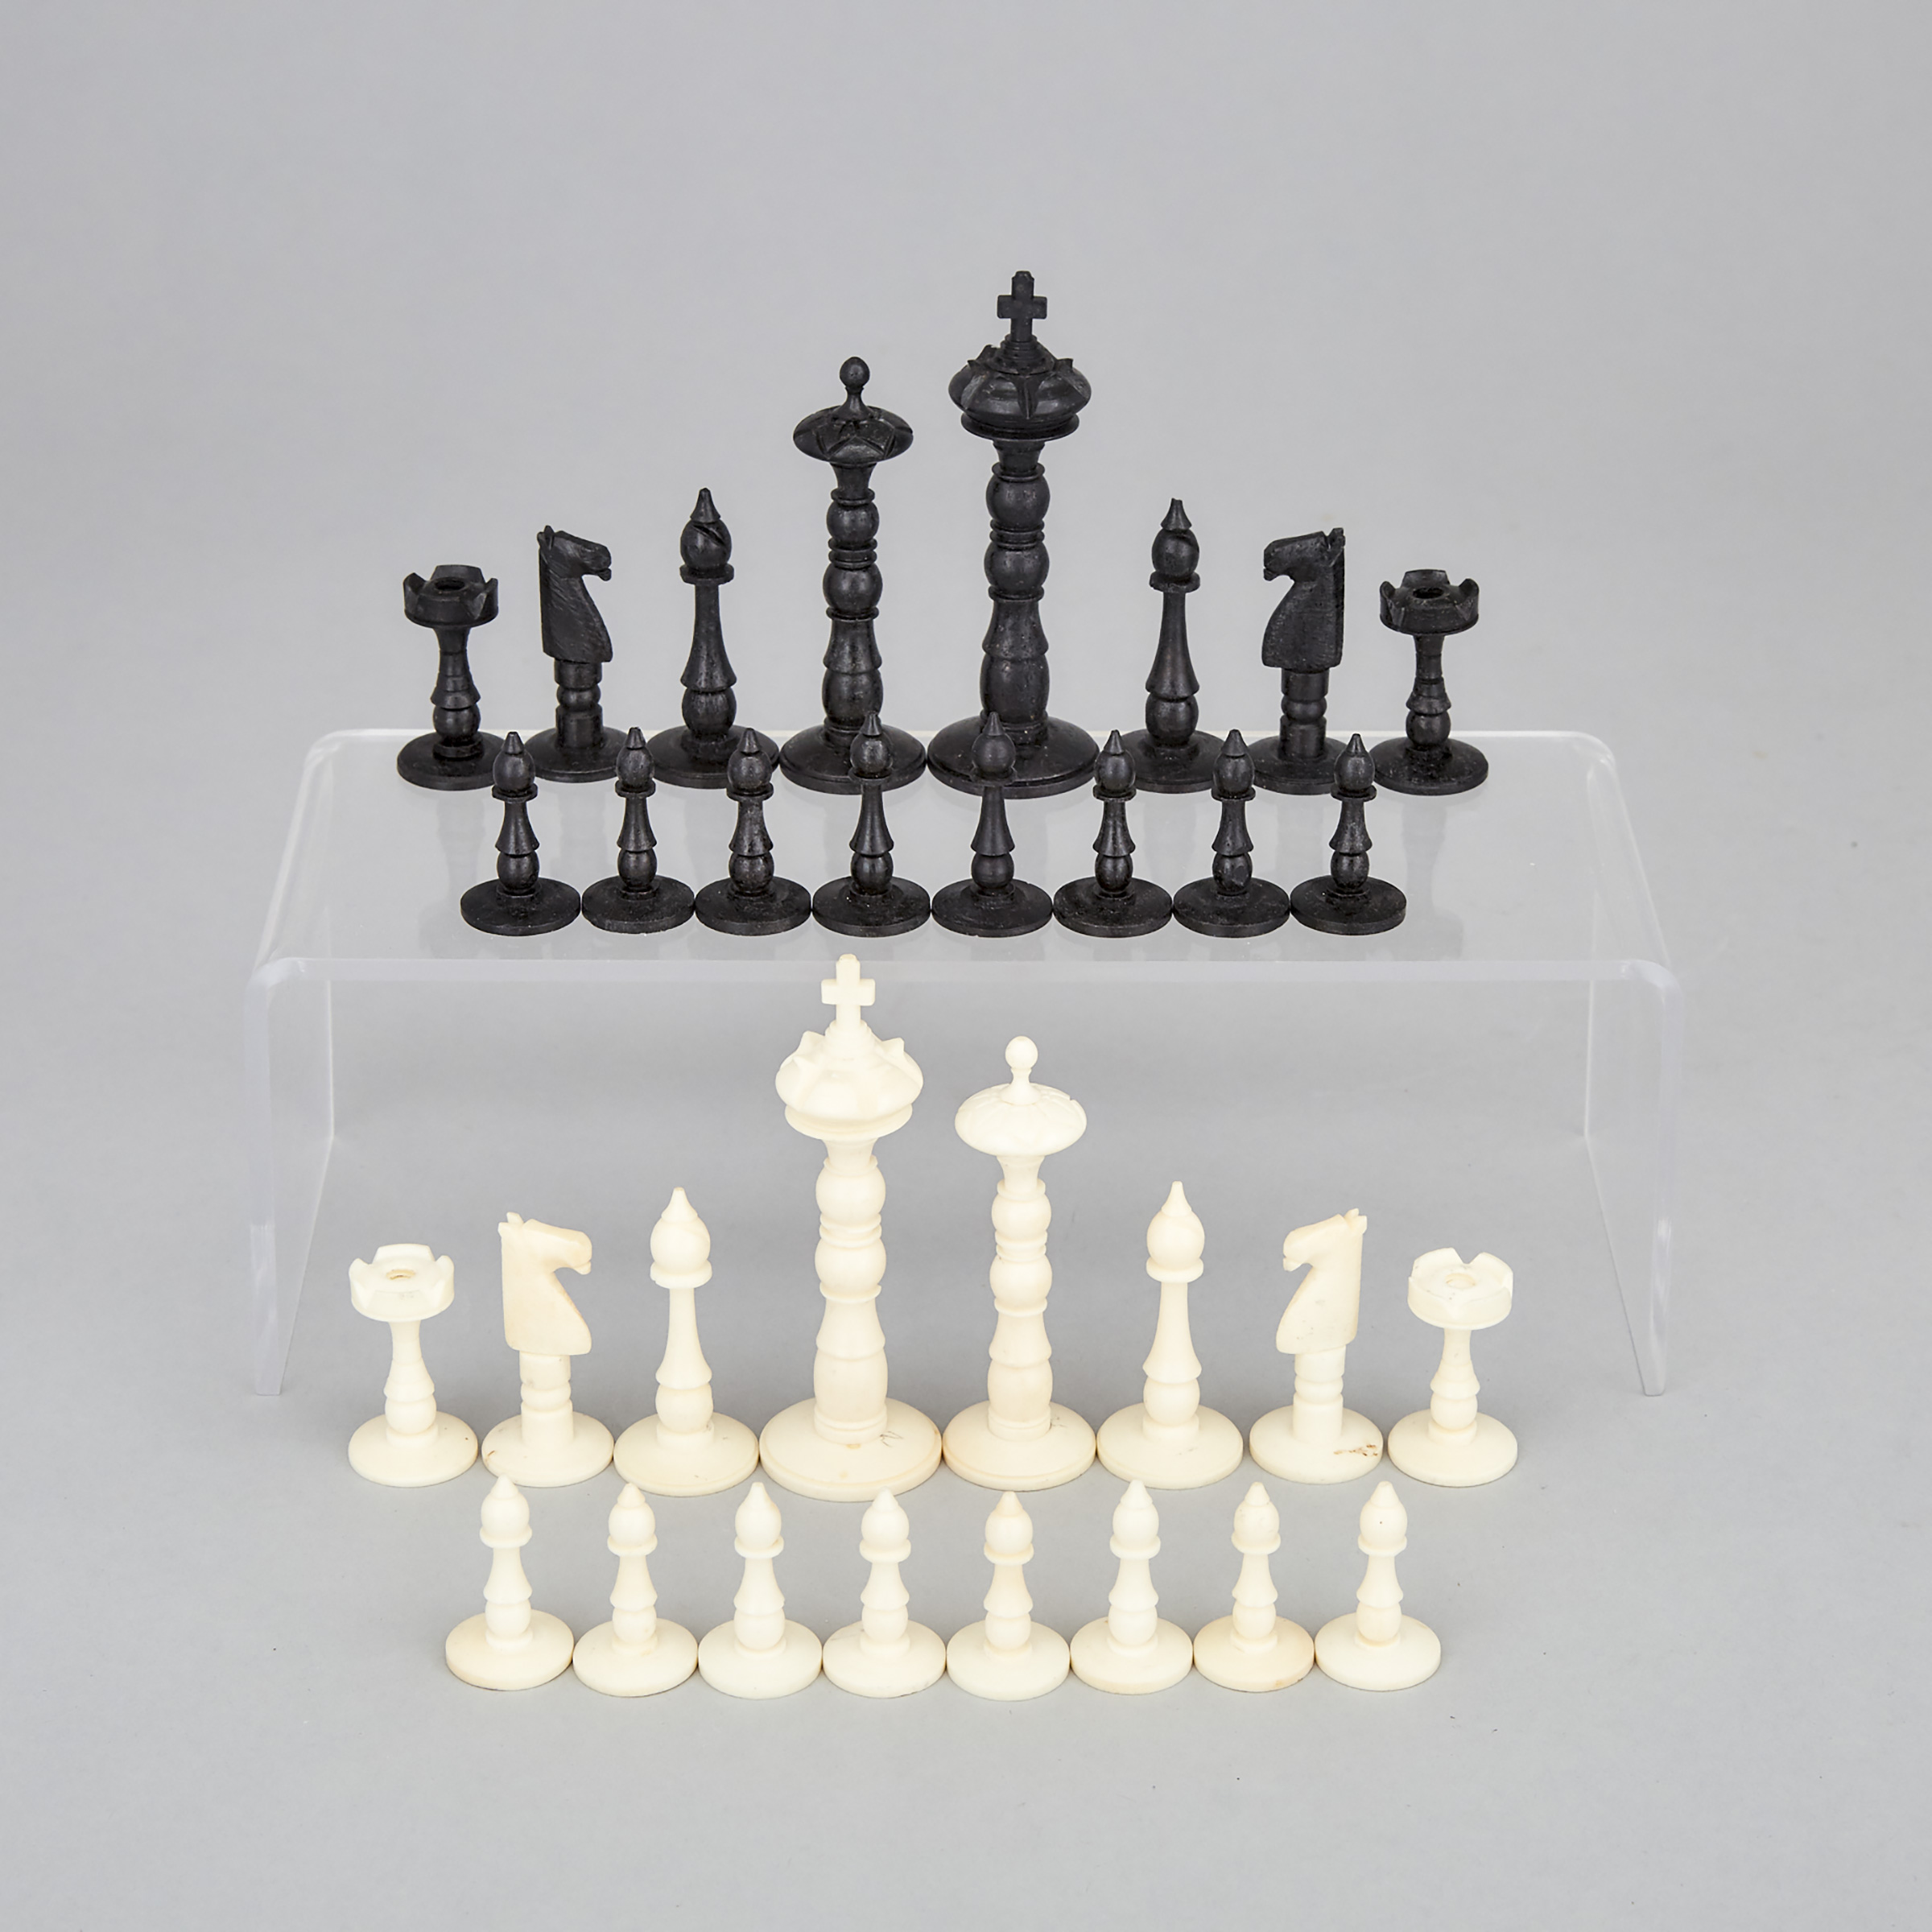 Indian Camel Bone Chess Set, early-mid 20th century